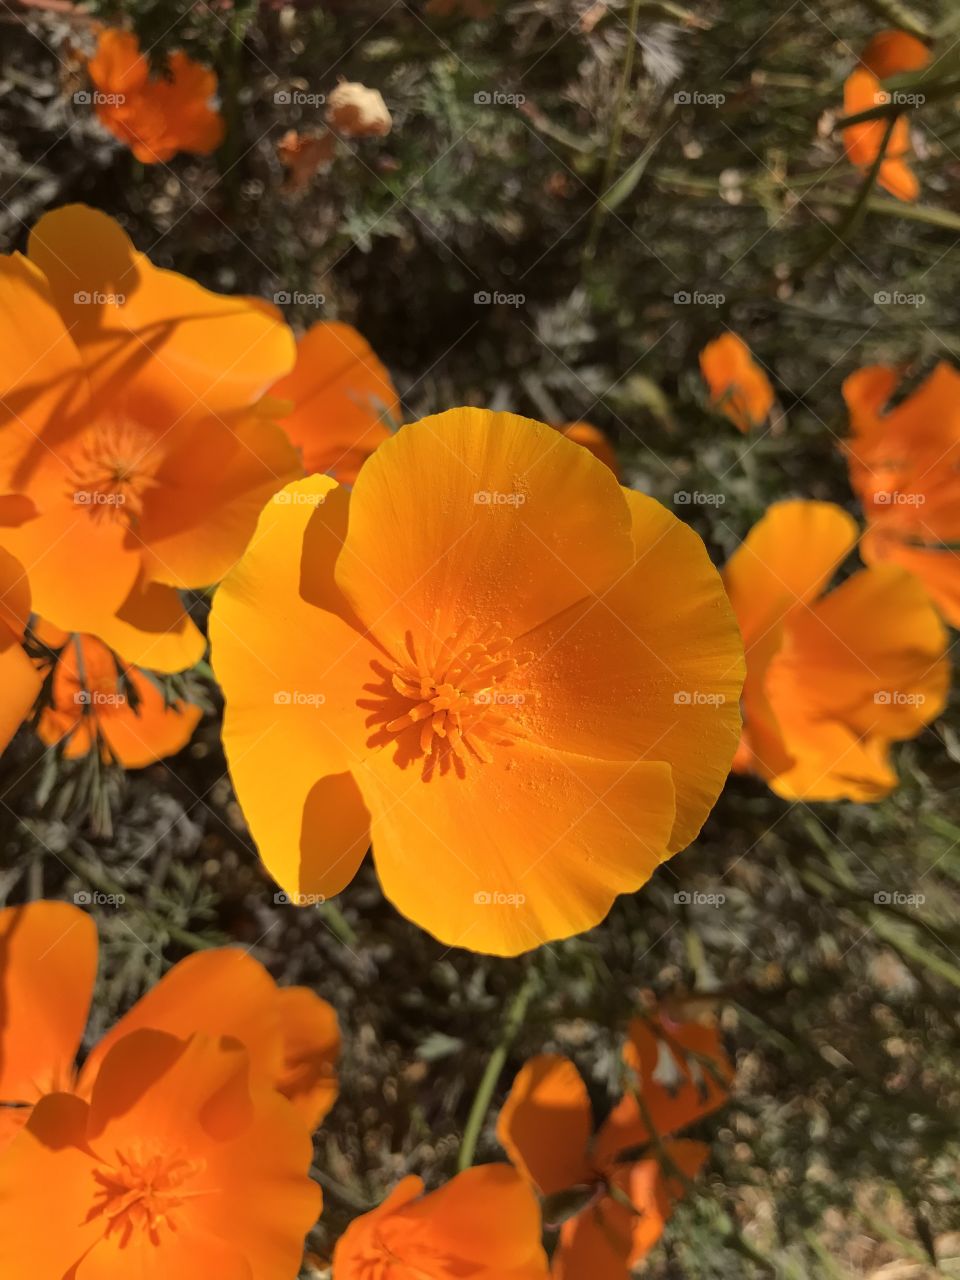 A California poppy, proud and bright and showing off in the summer light. Almost glowing with its orange radiance. 